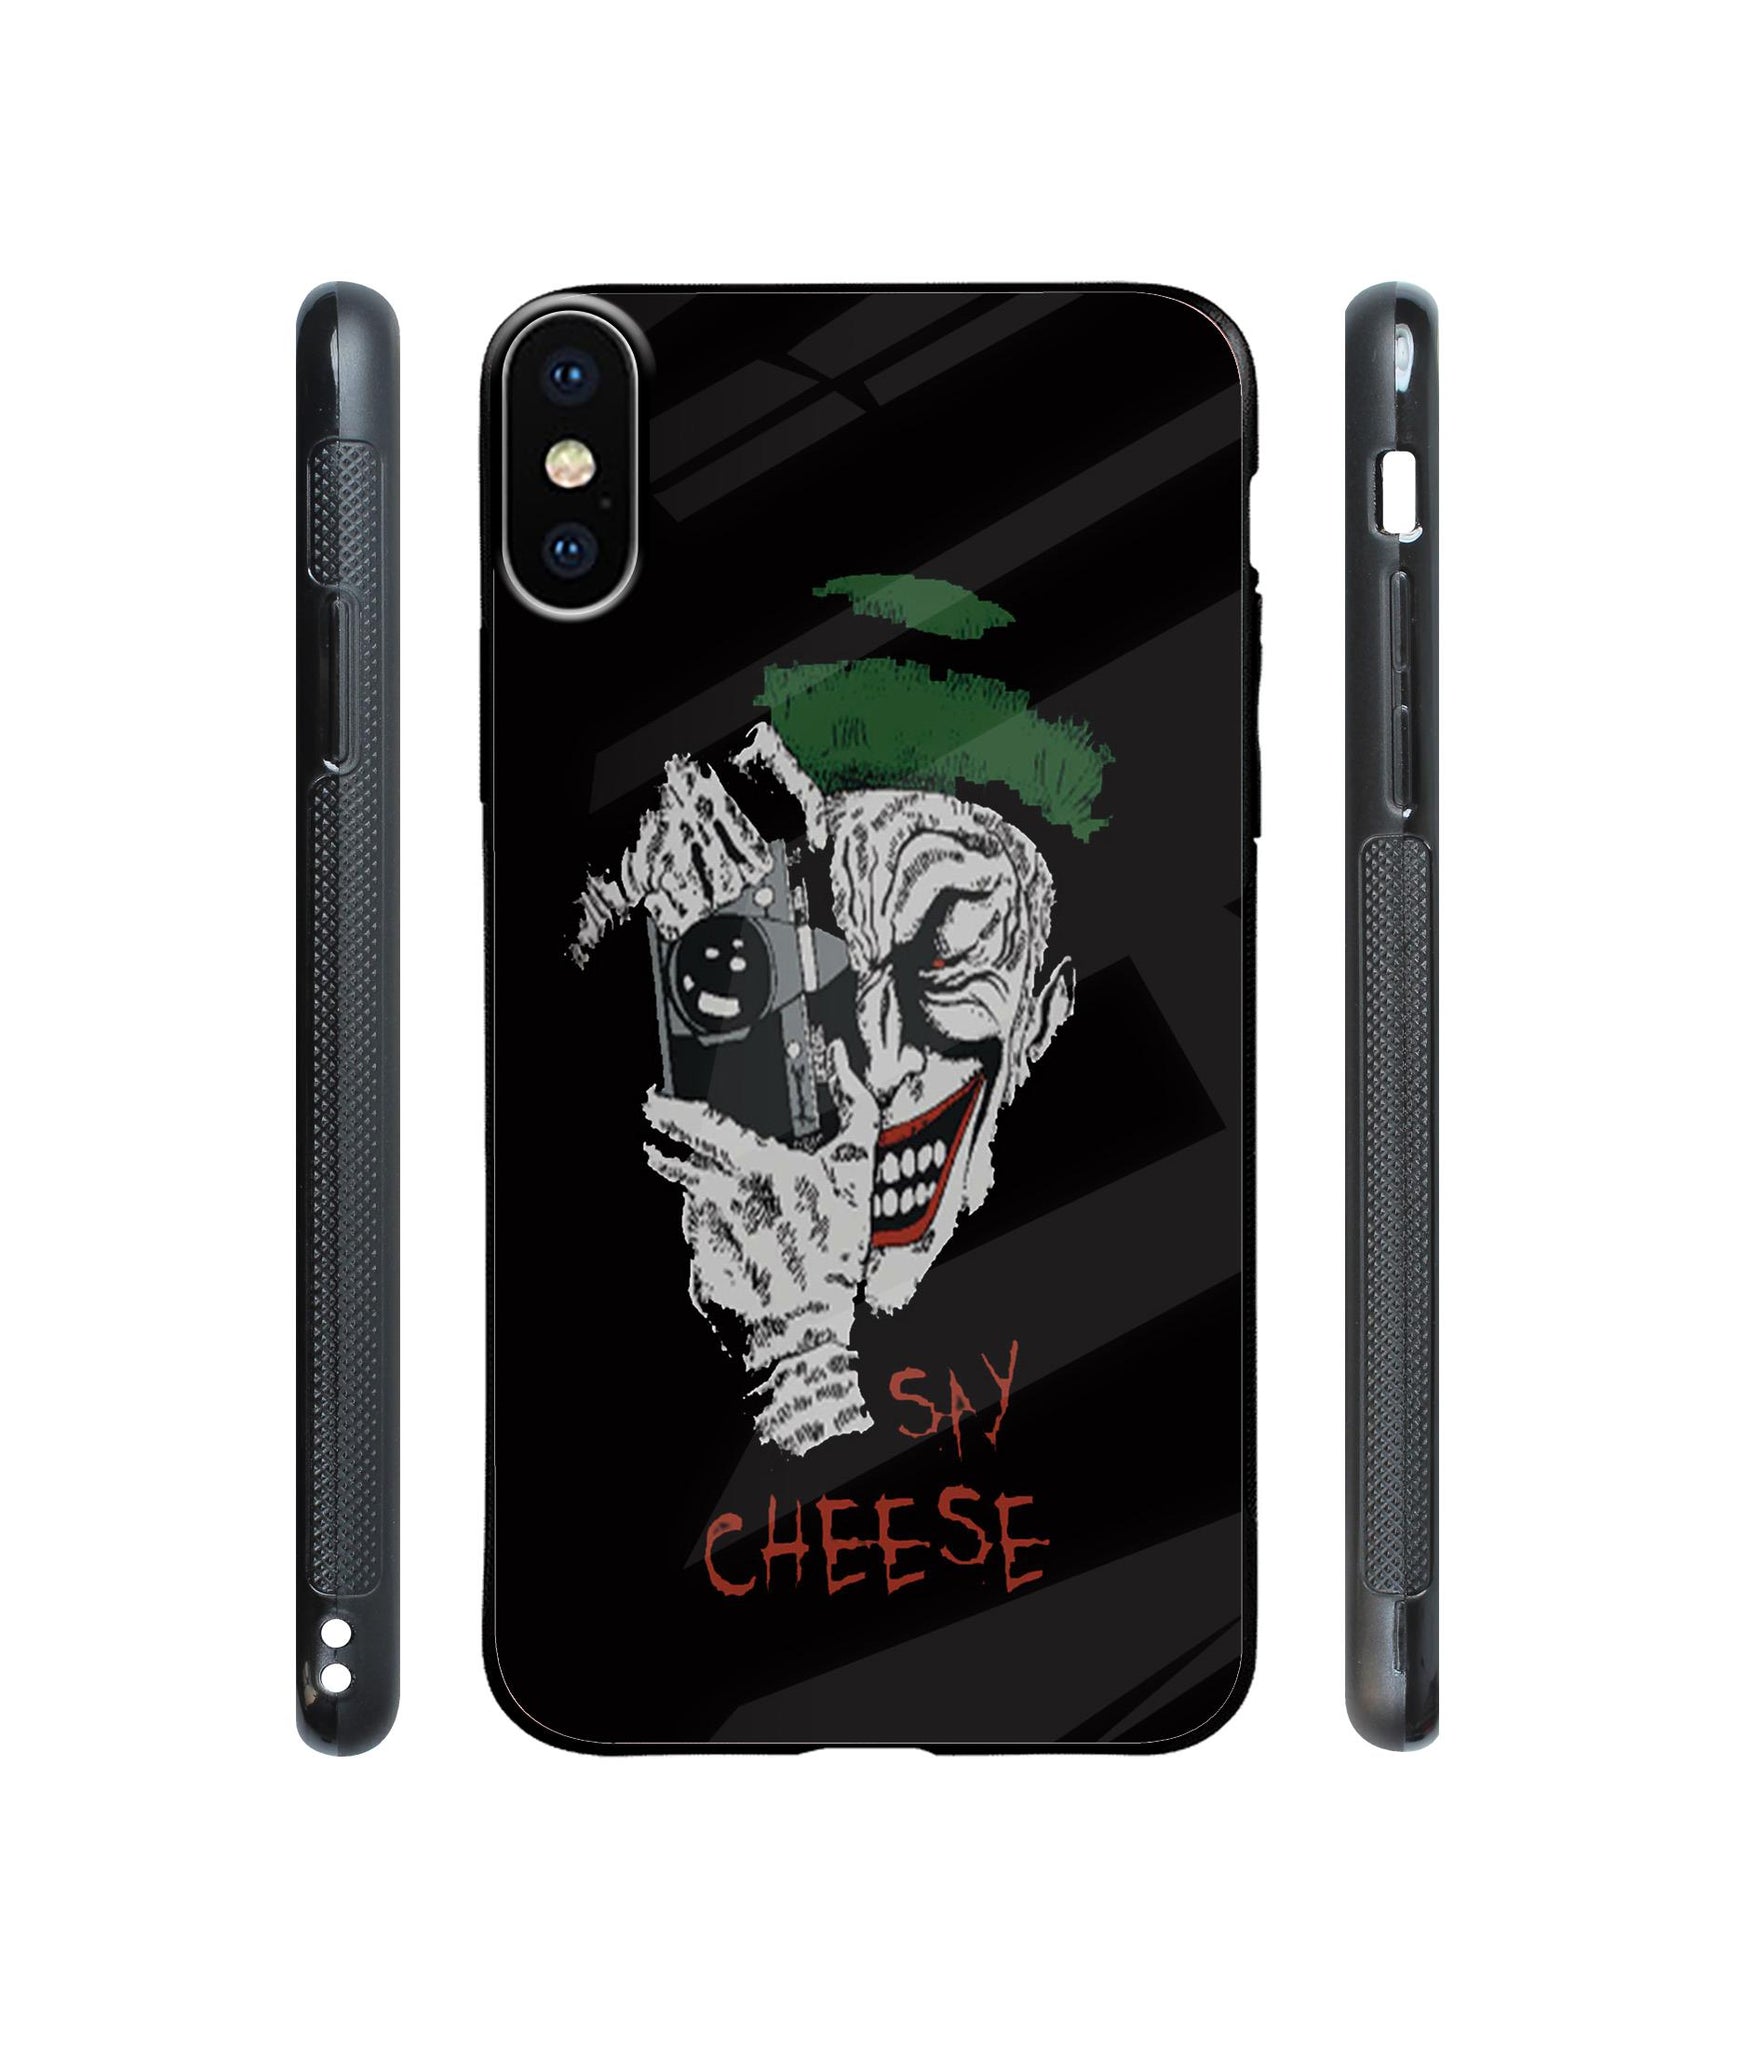 Joker Say Cheese Designer Printed Glass Cover for Apple iPhone XS Max